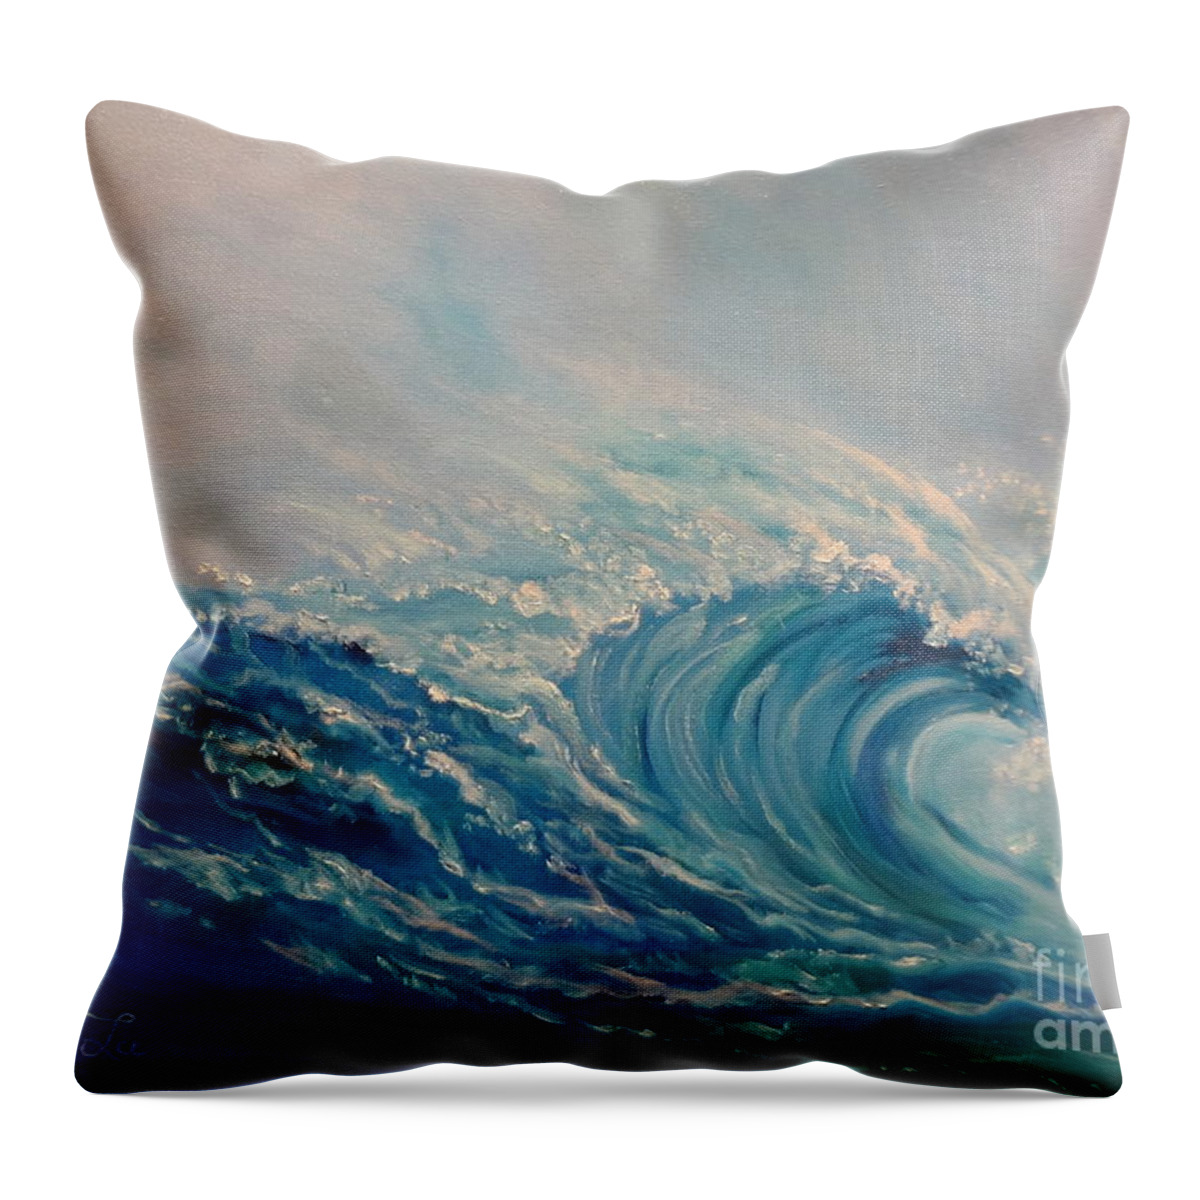 Giant Wave Throw Pillow featuring the painting Wave 111 by Jenny Lee